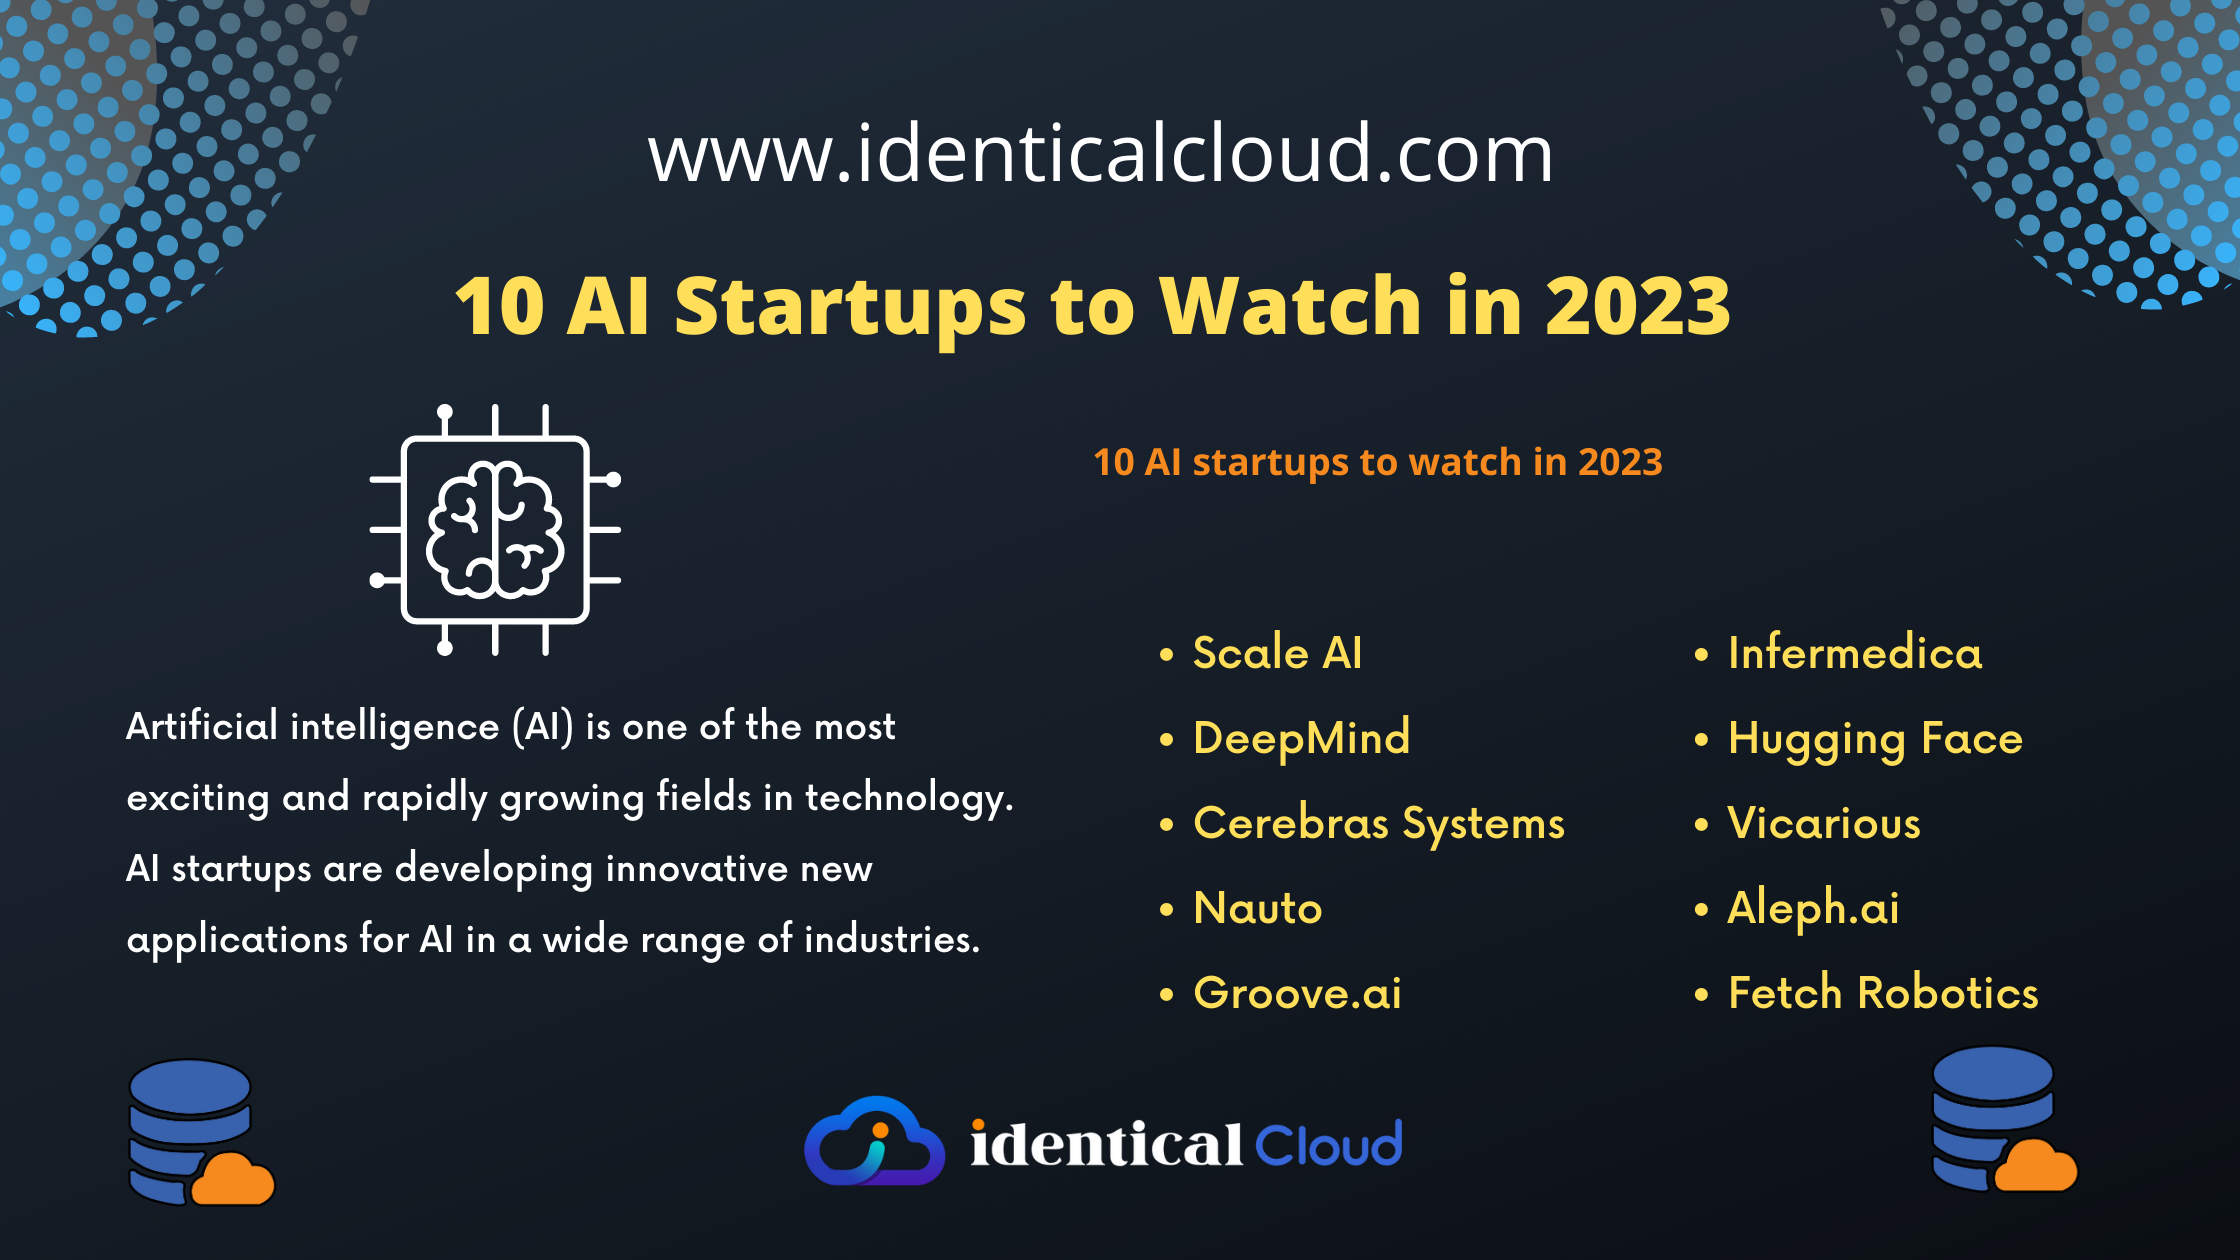 10 AI Startups to Watch in 2023 - identicalcloud.com